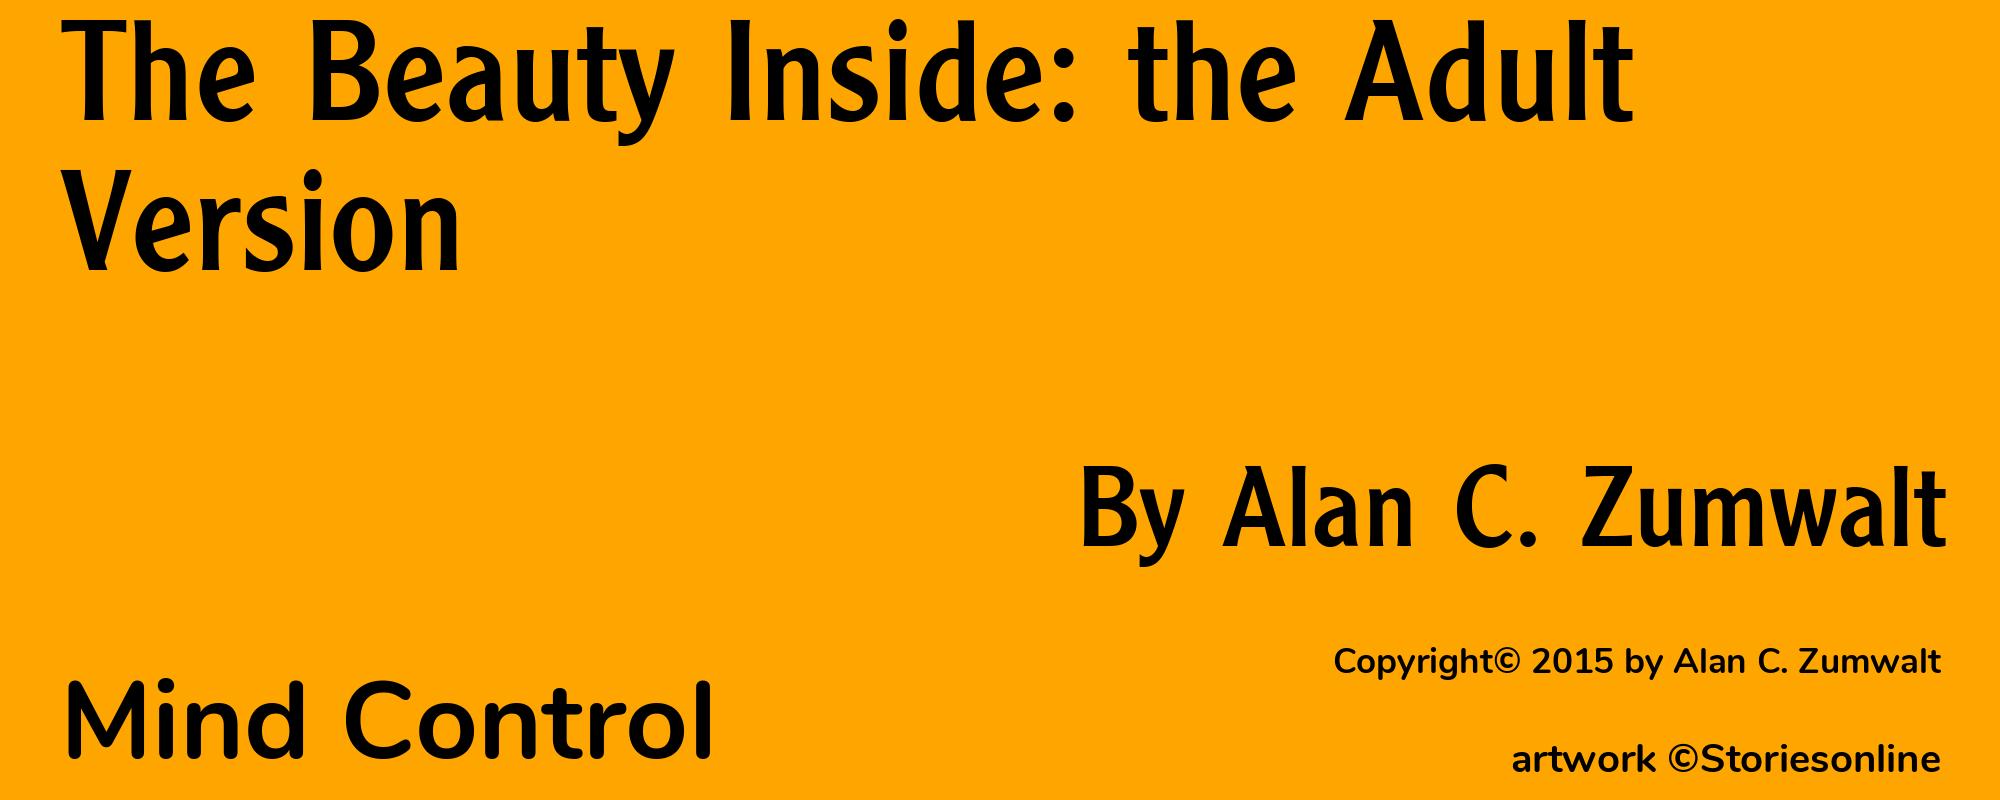 The Beauty Inside: the Adult Version - Cover